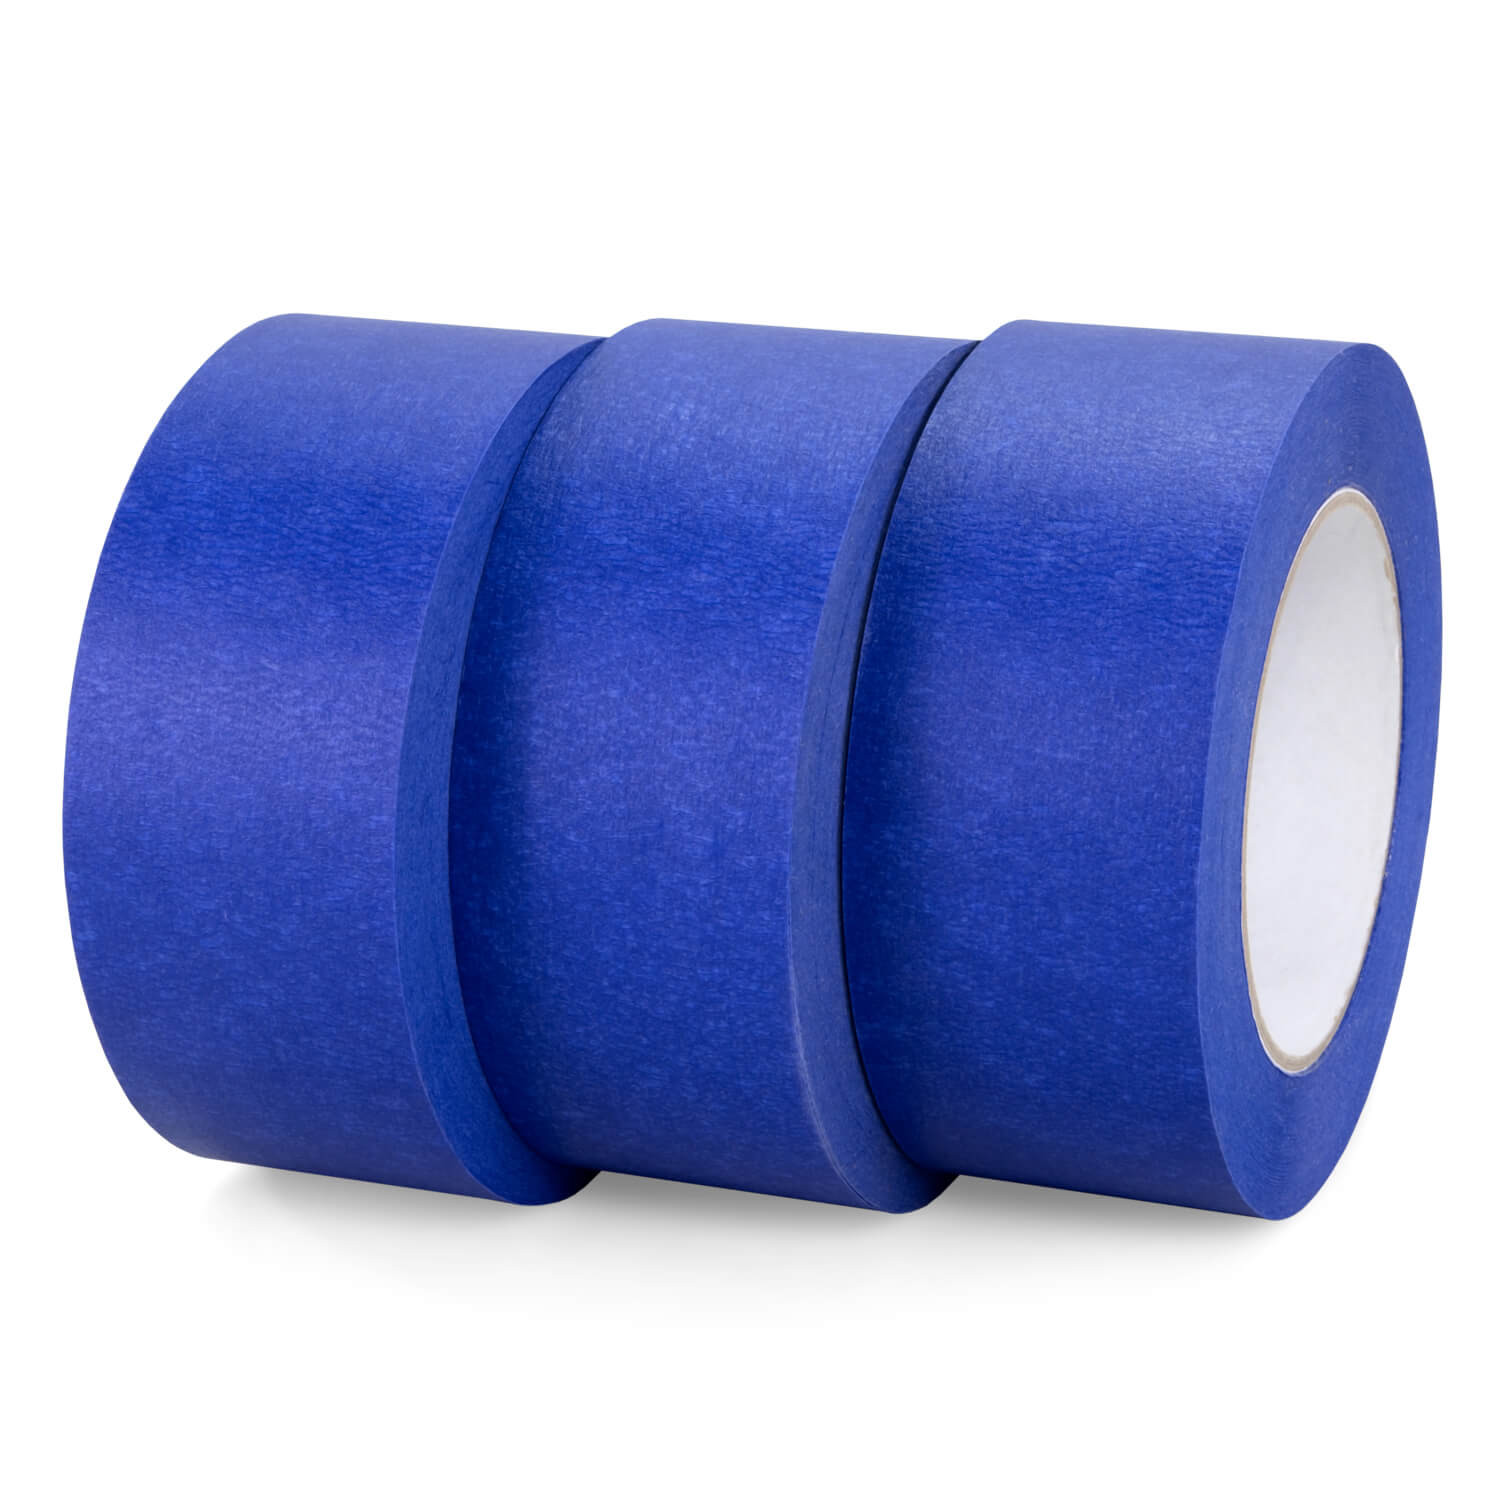 2 x 60 yards Blue Painters Tape for Painting, Natural Rubber buy in stock  in U.S. in IDL Packaging